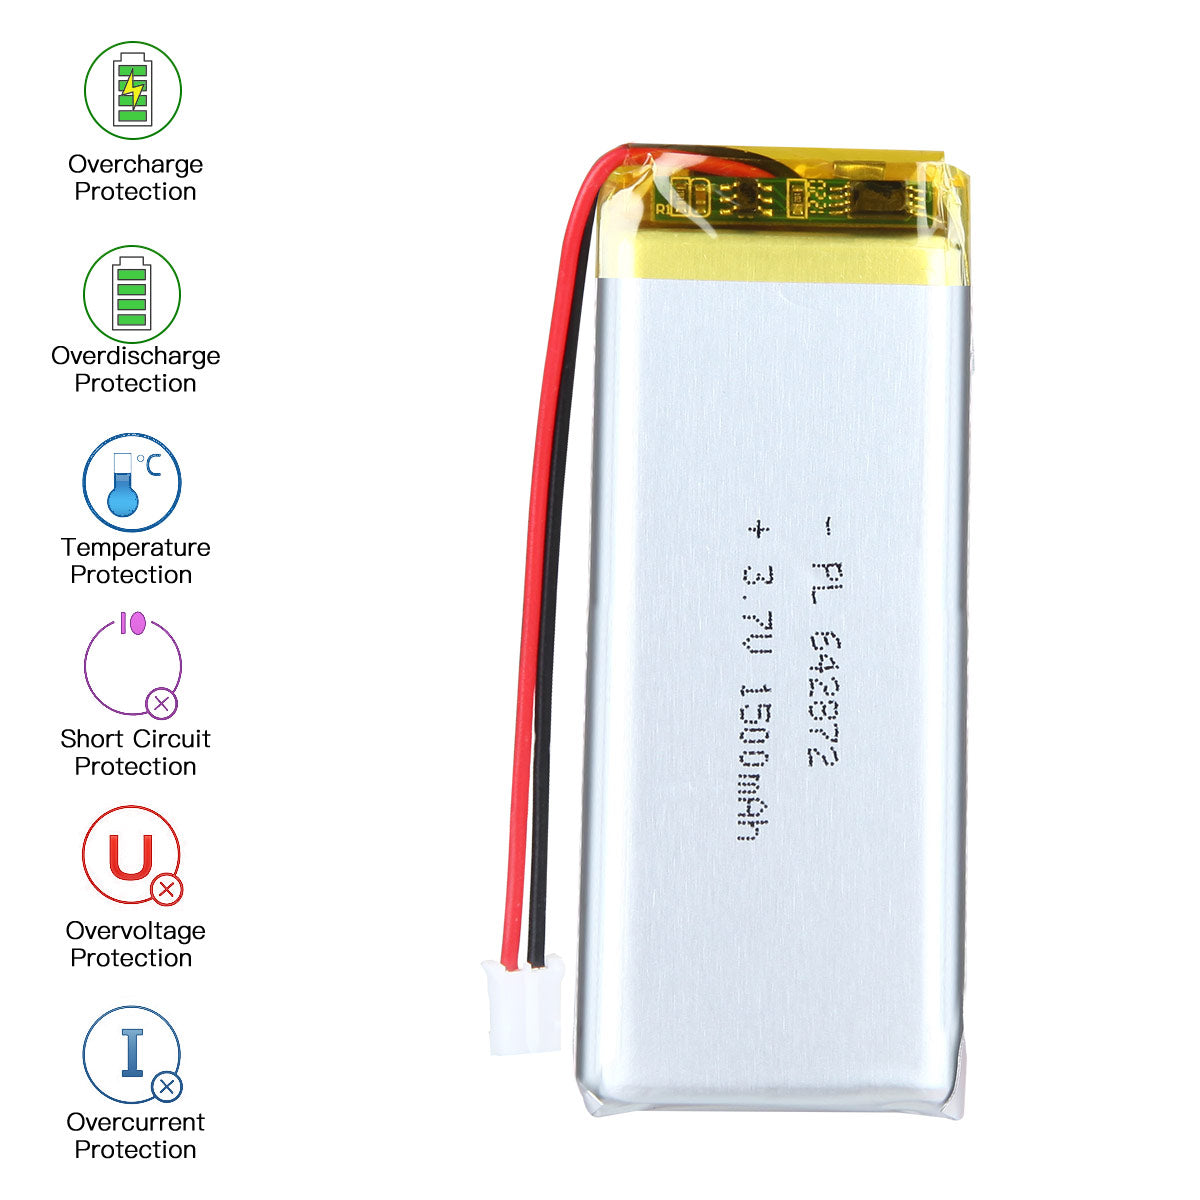 YDL 3.7V 1500mAh 642872 Rechargeable Lithium Polymer Battery Length 74mm